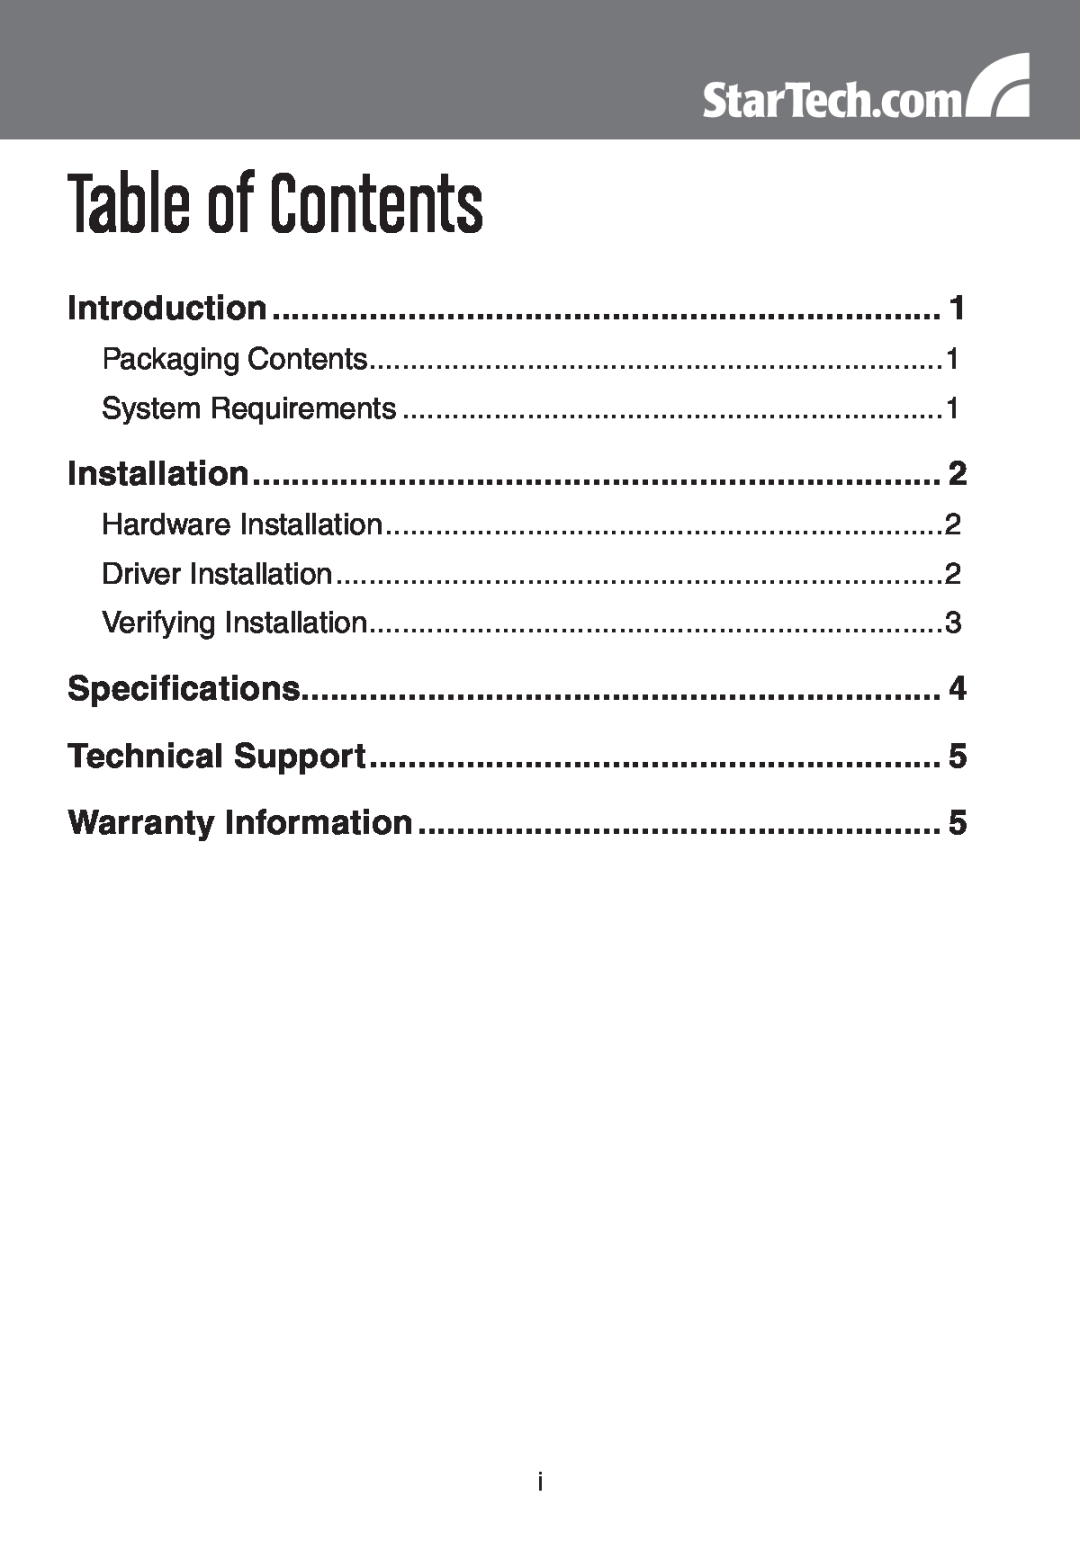 StarTech.com EC1000S instruction manual Table of Contents, Introduction, Installation, Specifications, Technical Support 